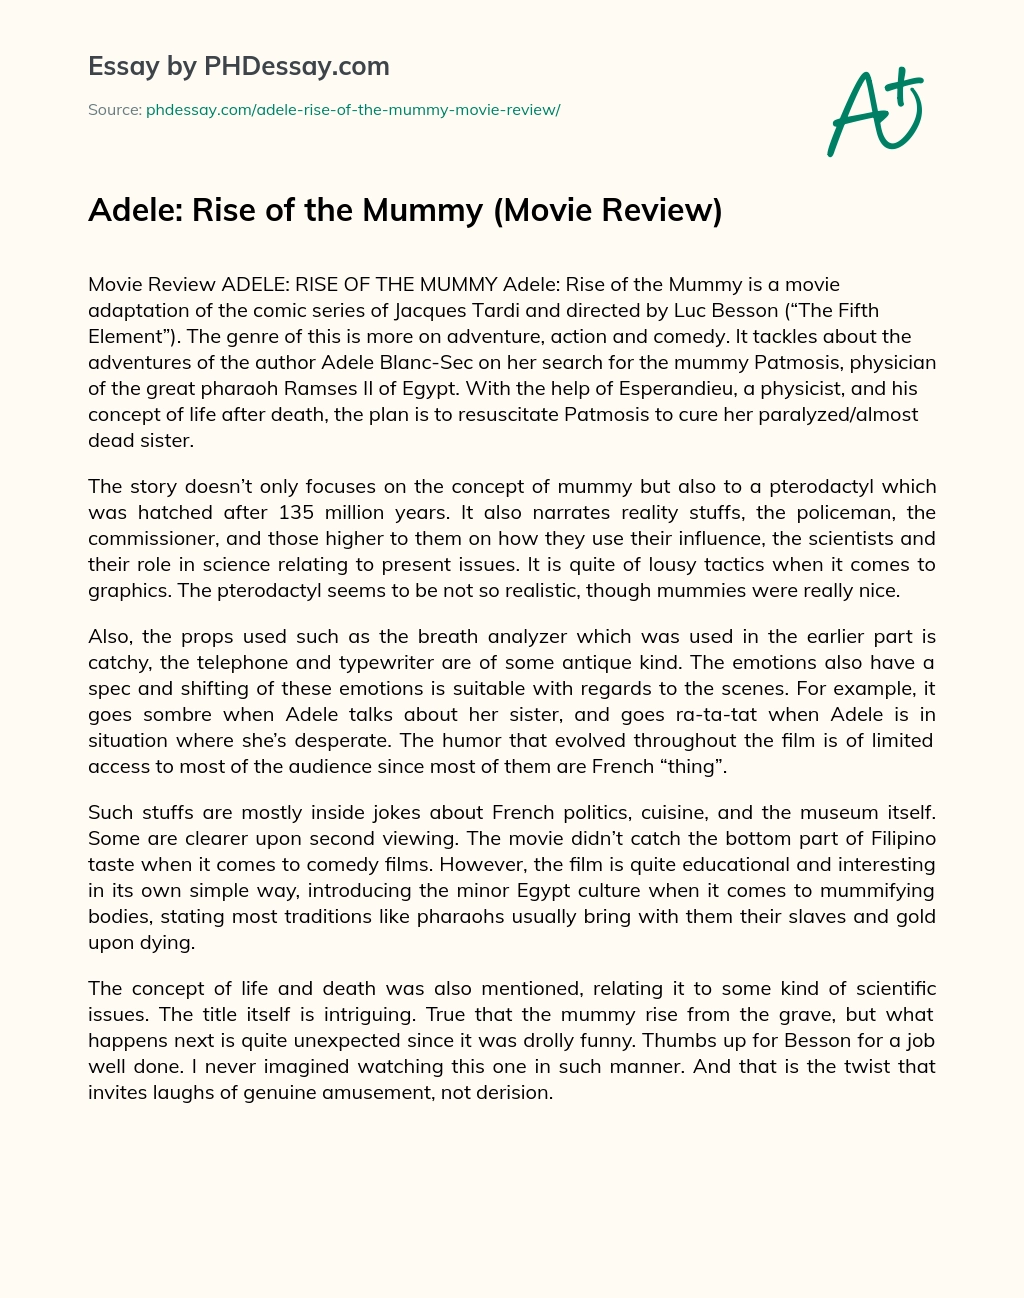 Adele: Rise of the Mummy (Movie Review) essay